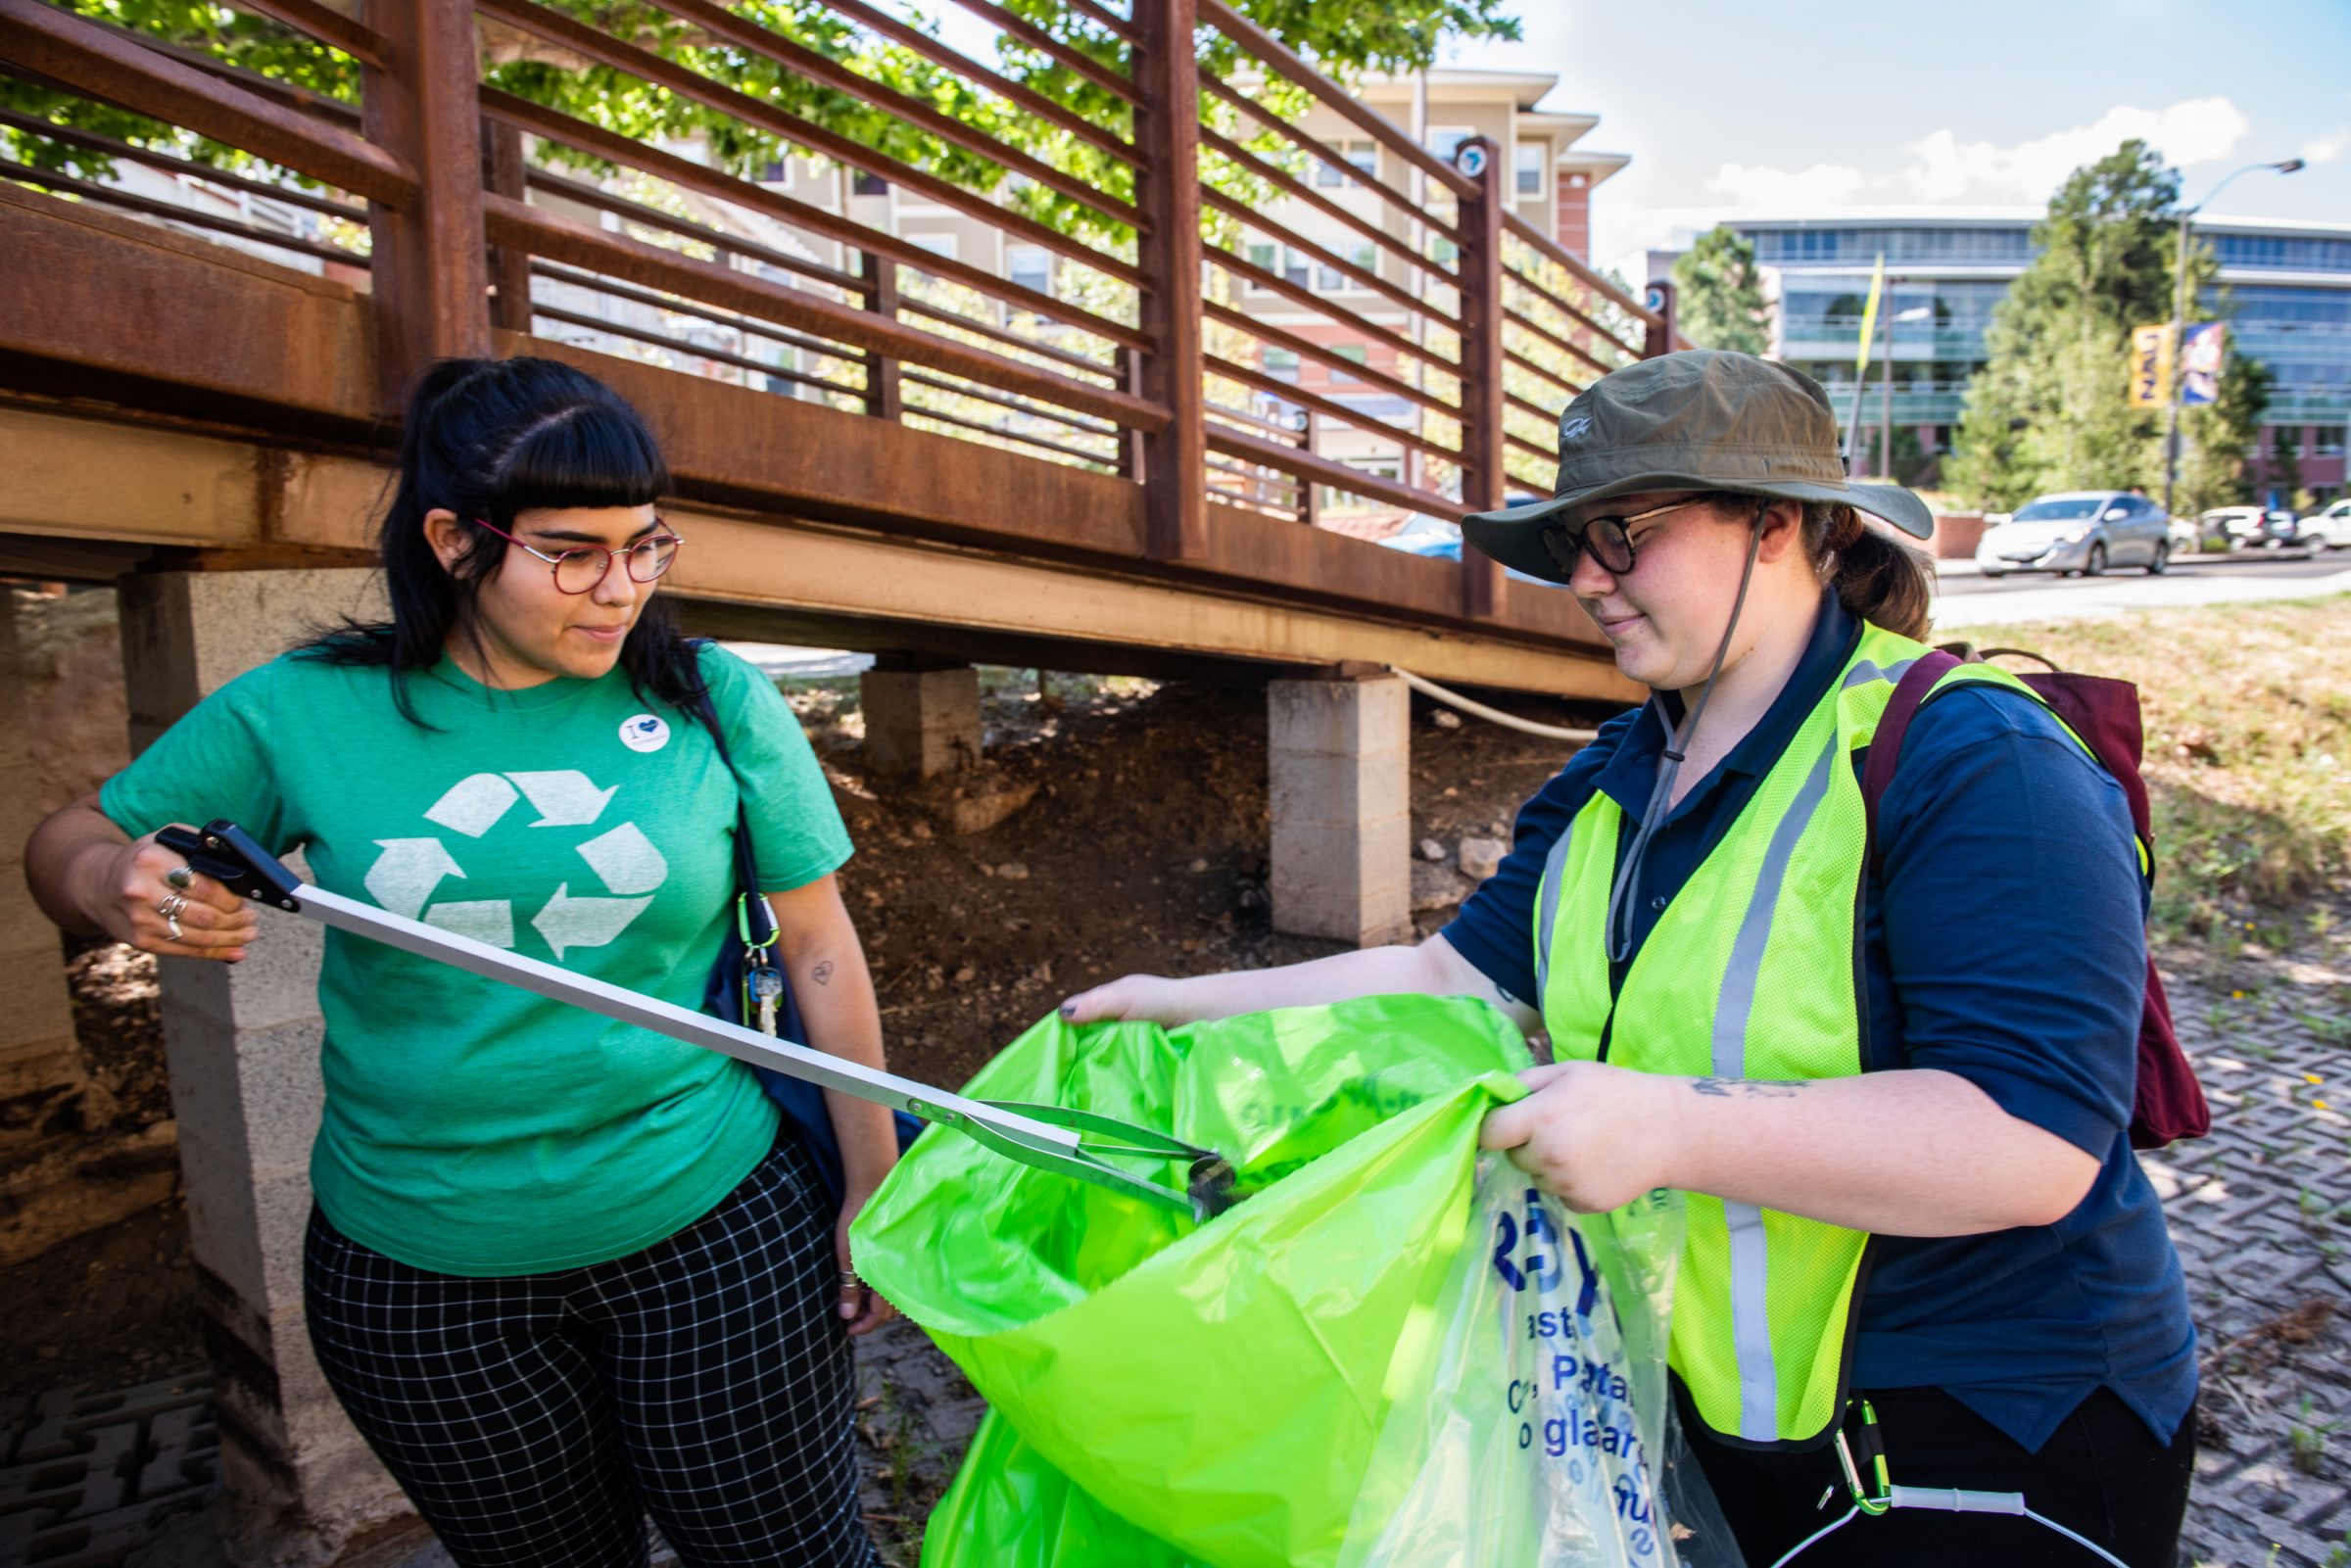 NAU community members volunteering to clean up trash during an "Axe the Trash" event.